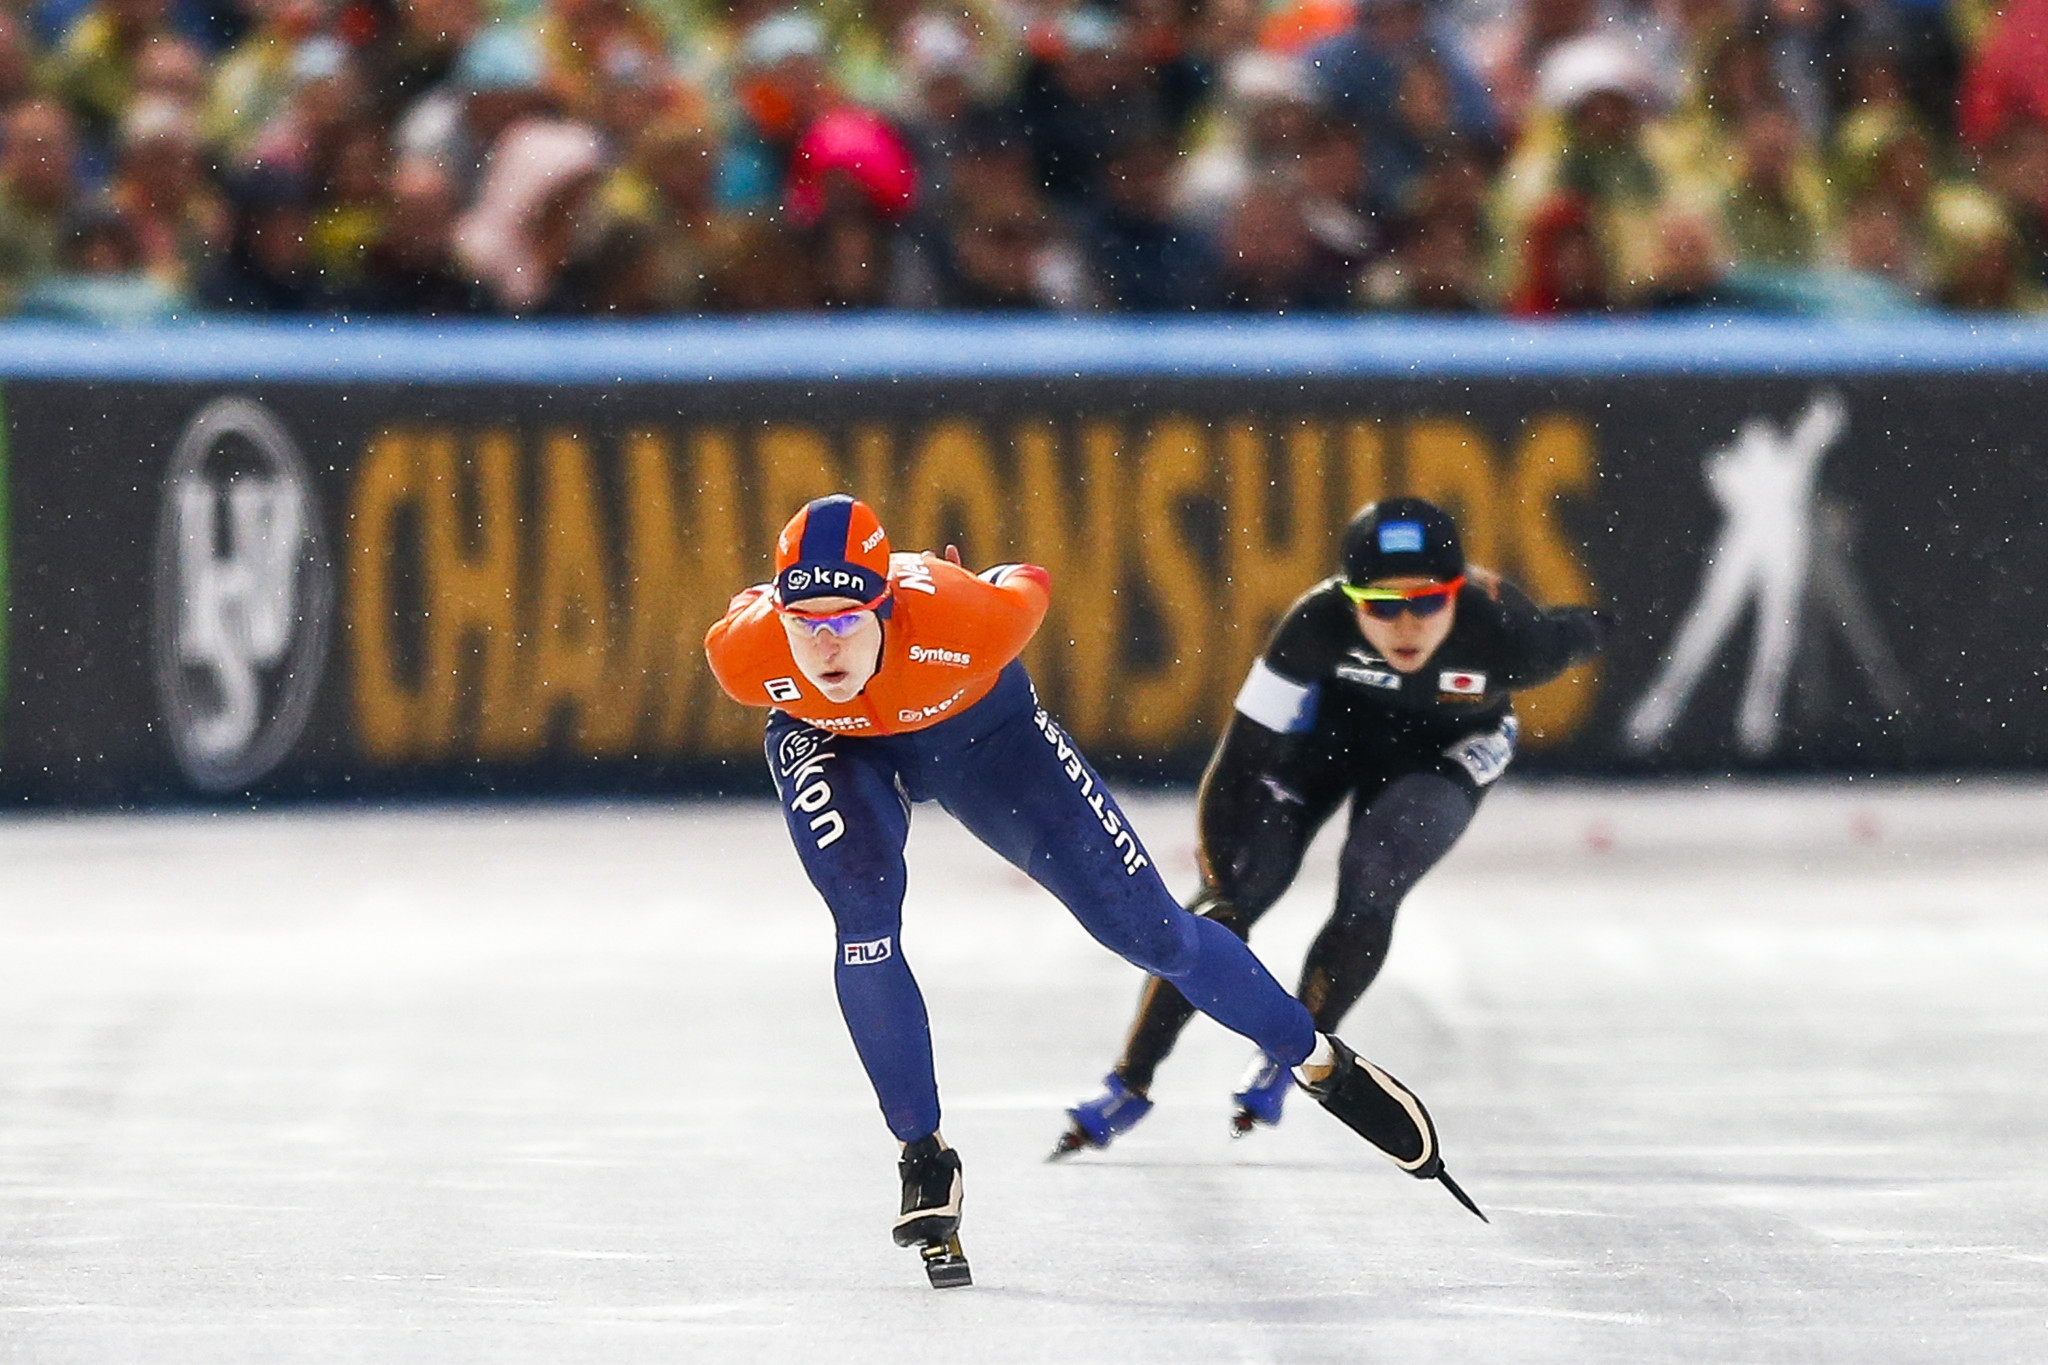 Ireen Wüst won the women's 1,500m Division A race on home ice ©Getty Images